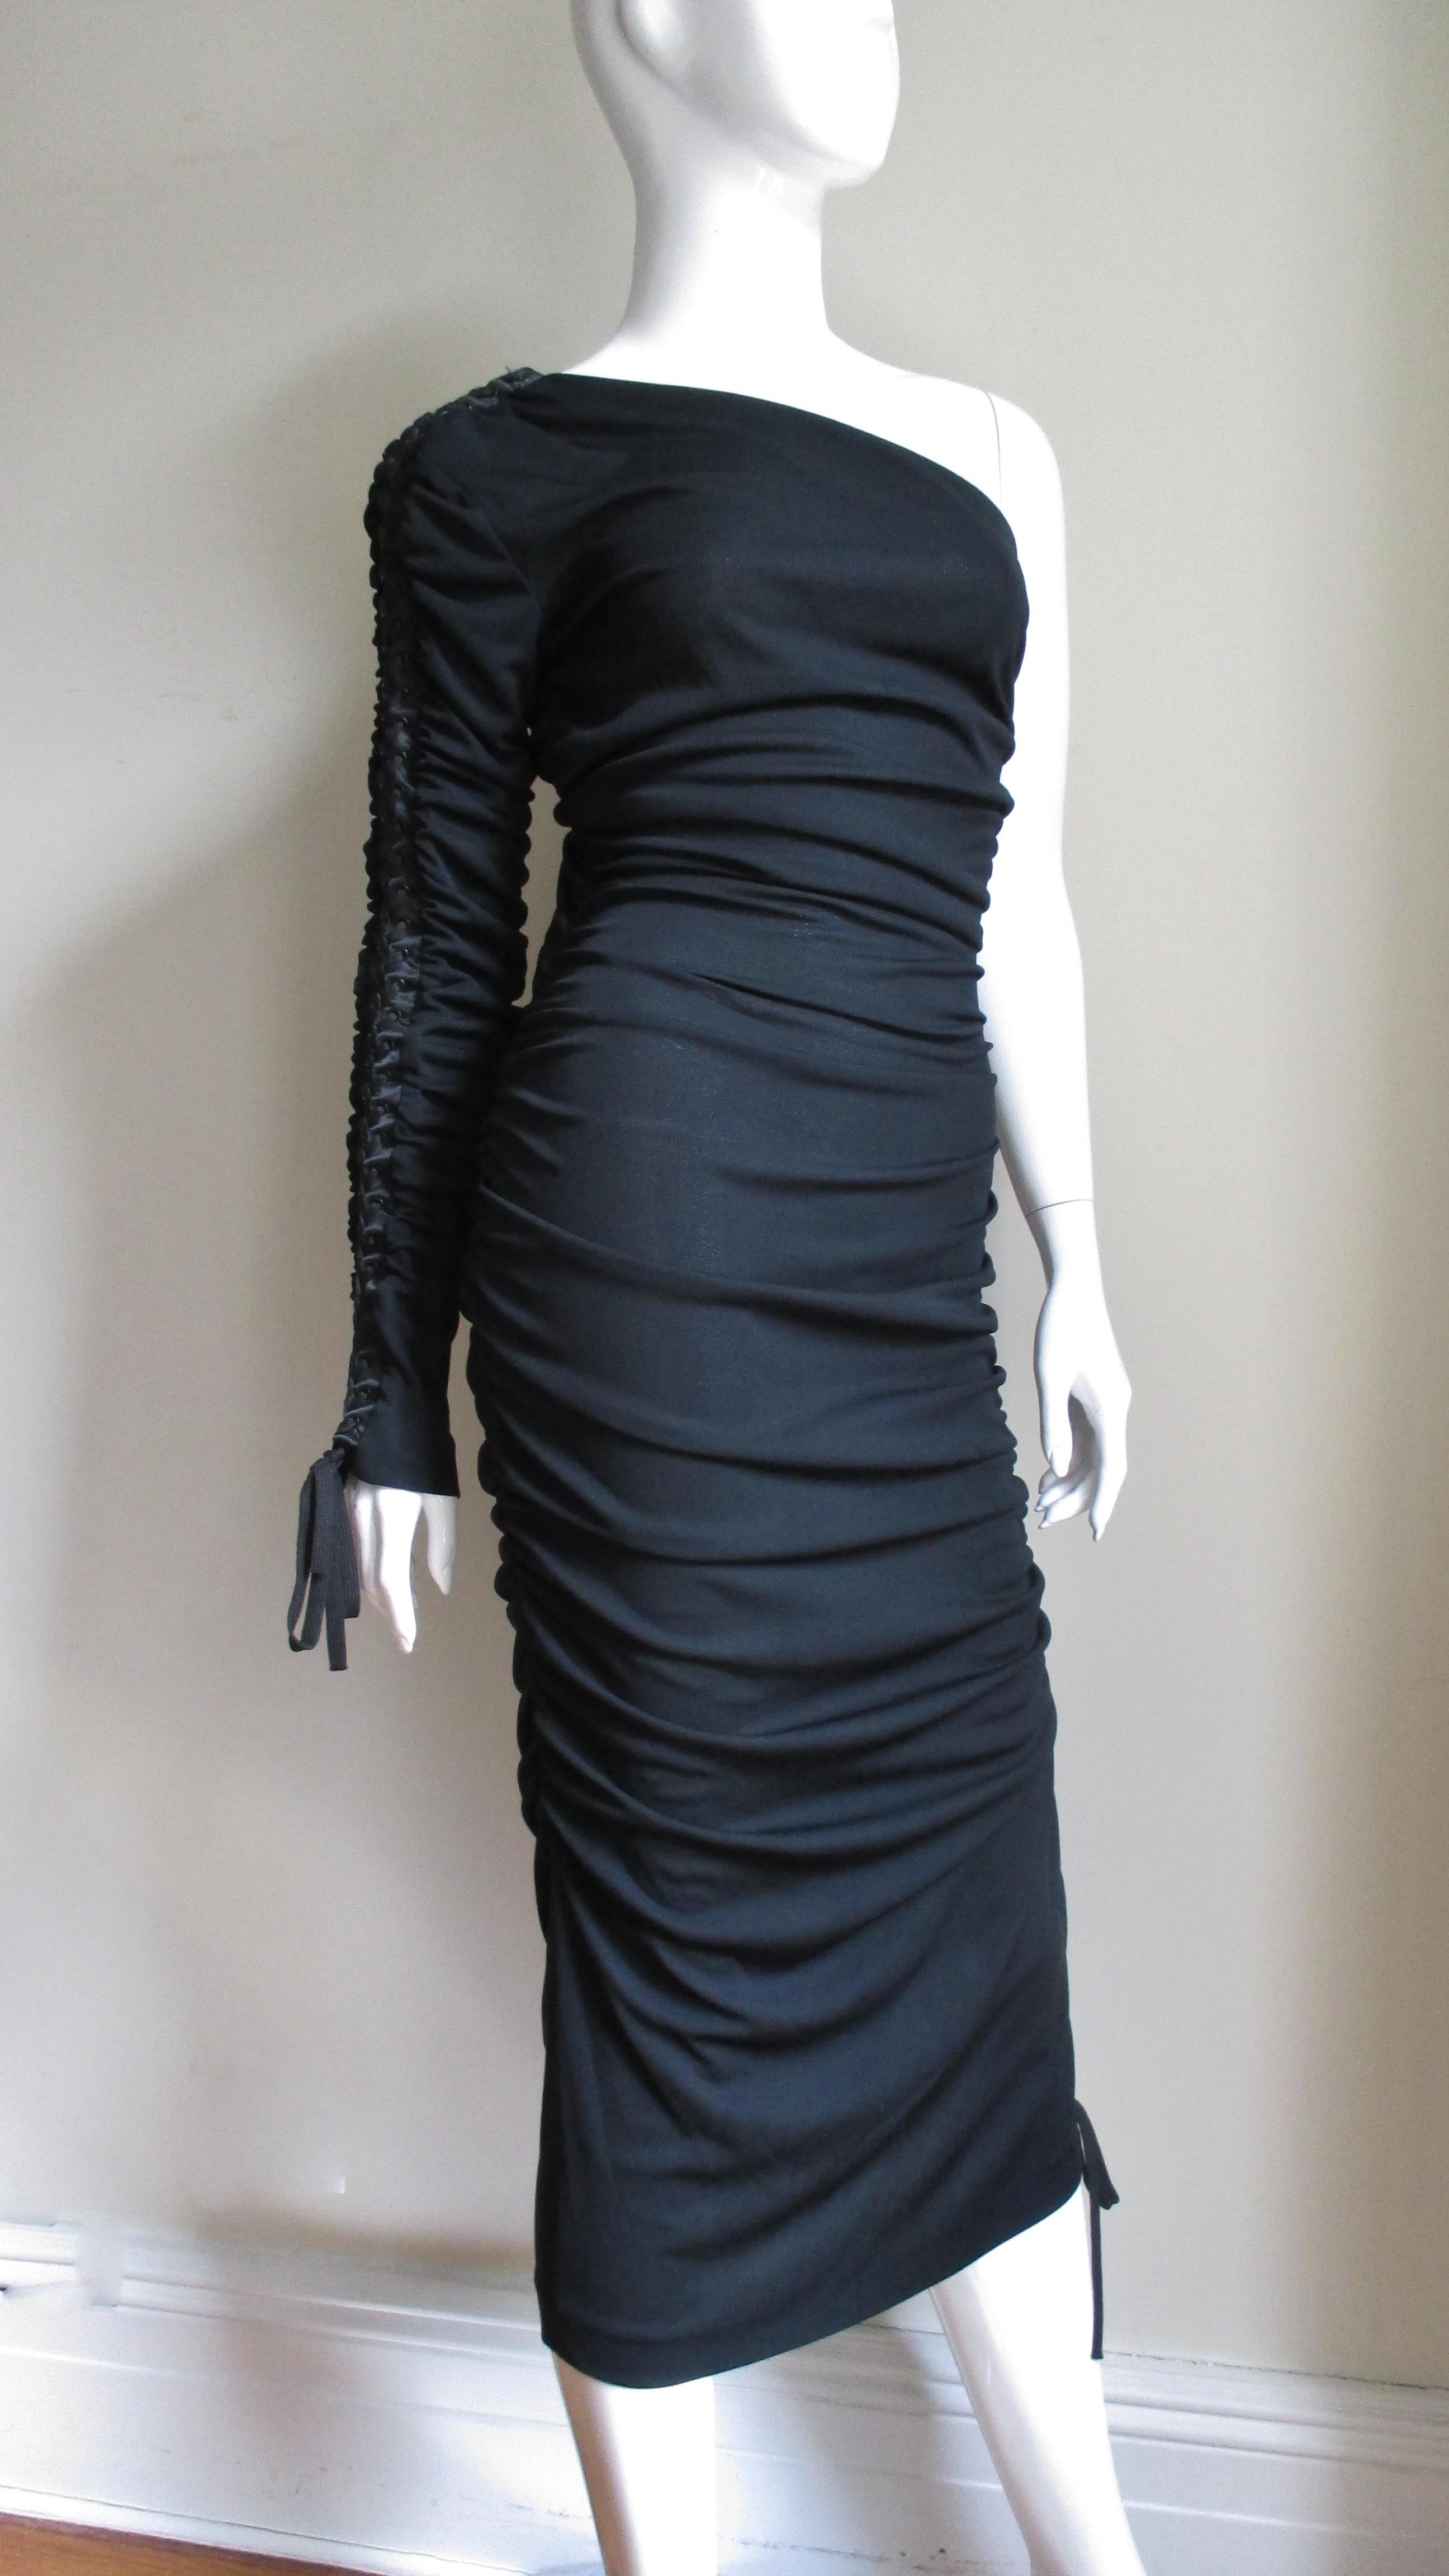 A fabulous black silk jersey dress from Dolce & Gabbana. The fitted dress has one sleeve and intricate functional adjustable lacing along the top of the sleeve from wrist to shoulder and along the length of opposite side of the dress creating